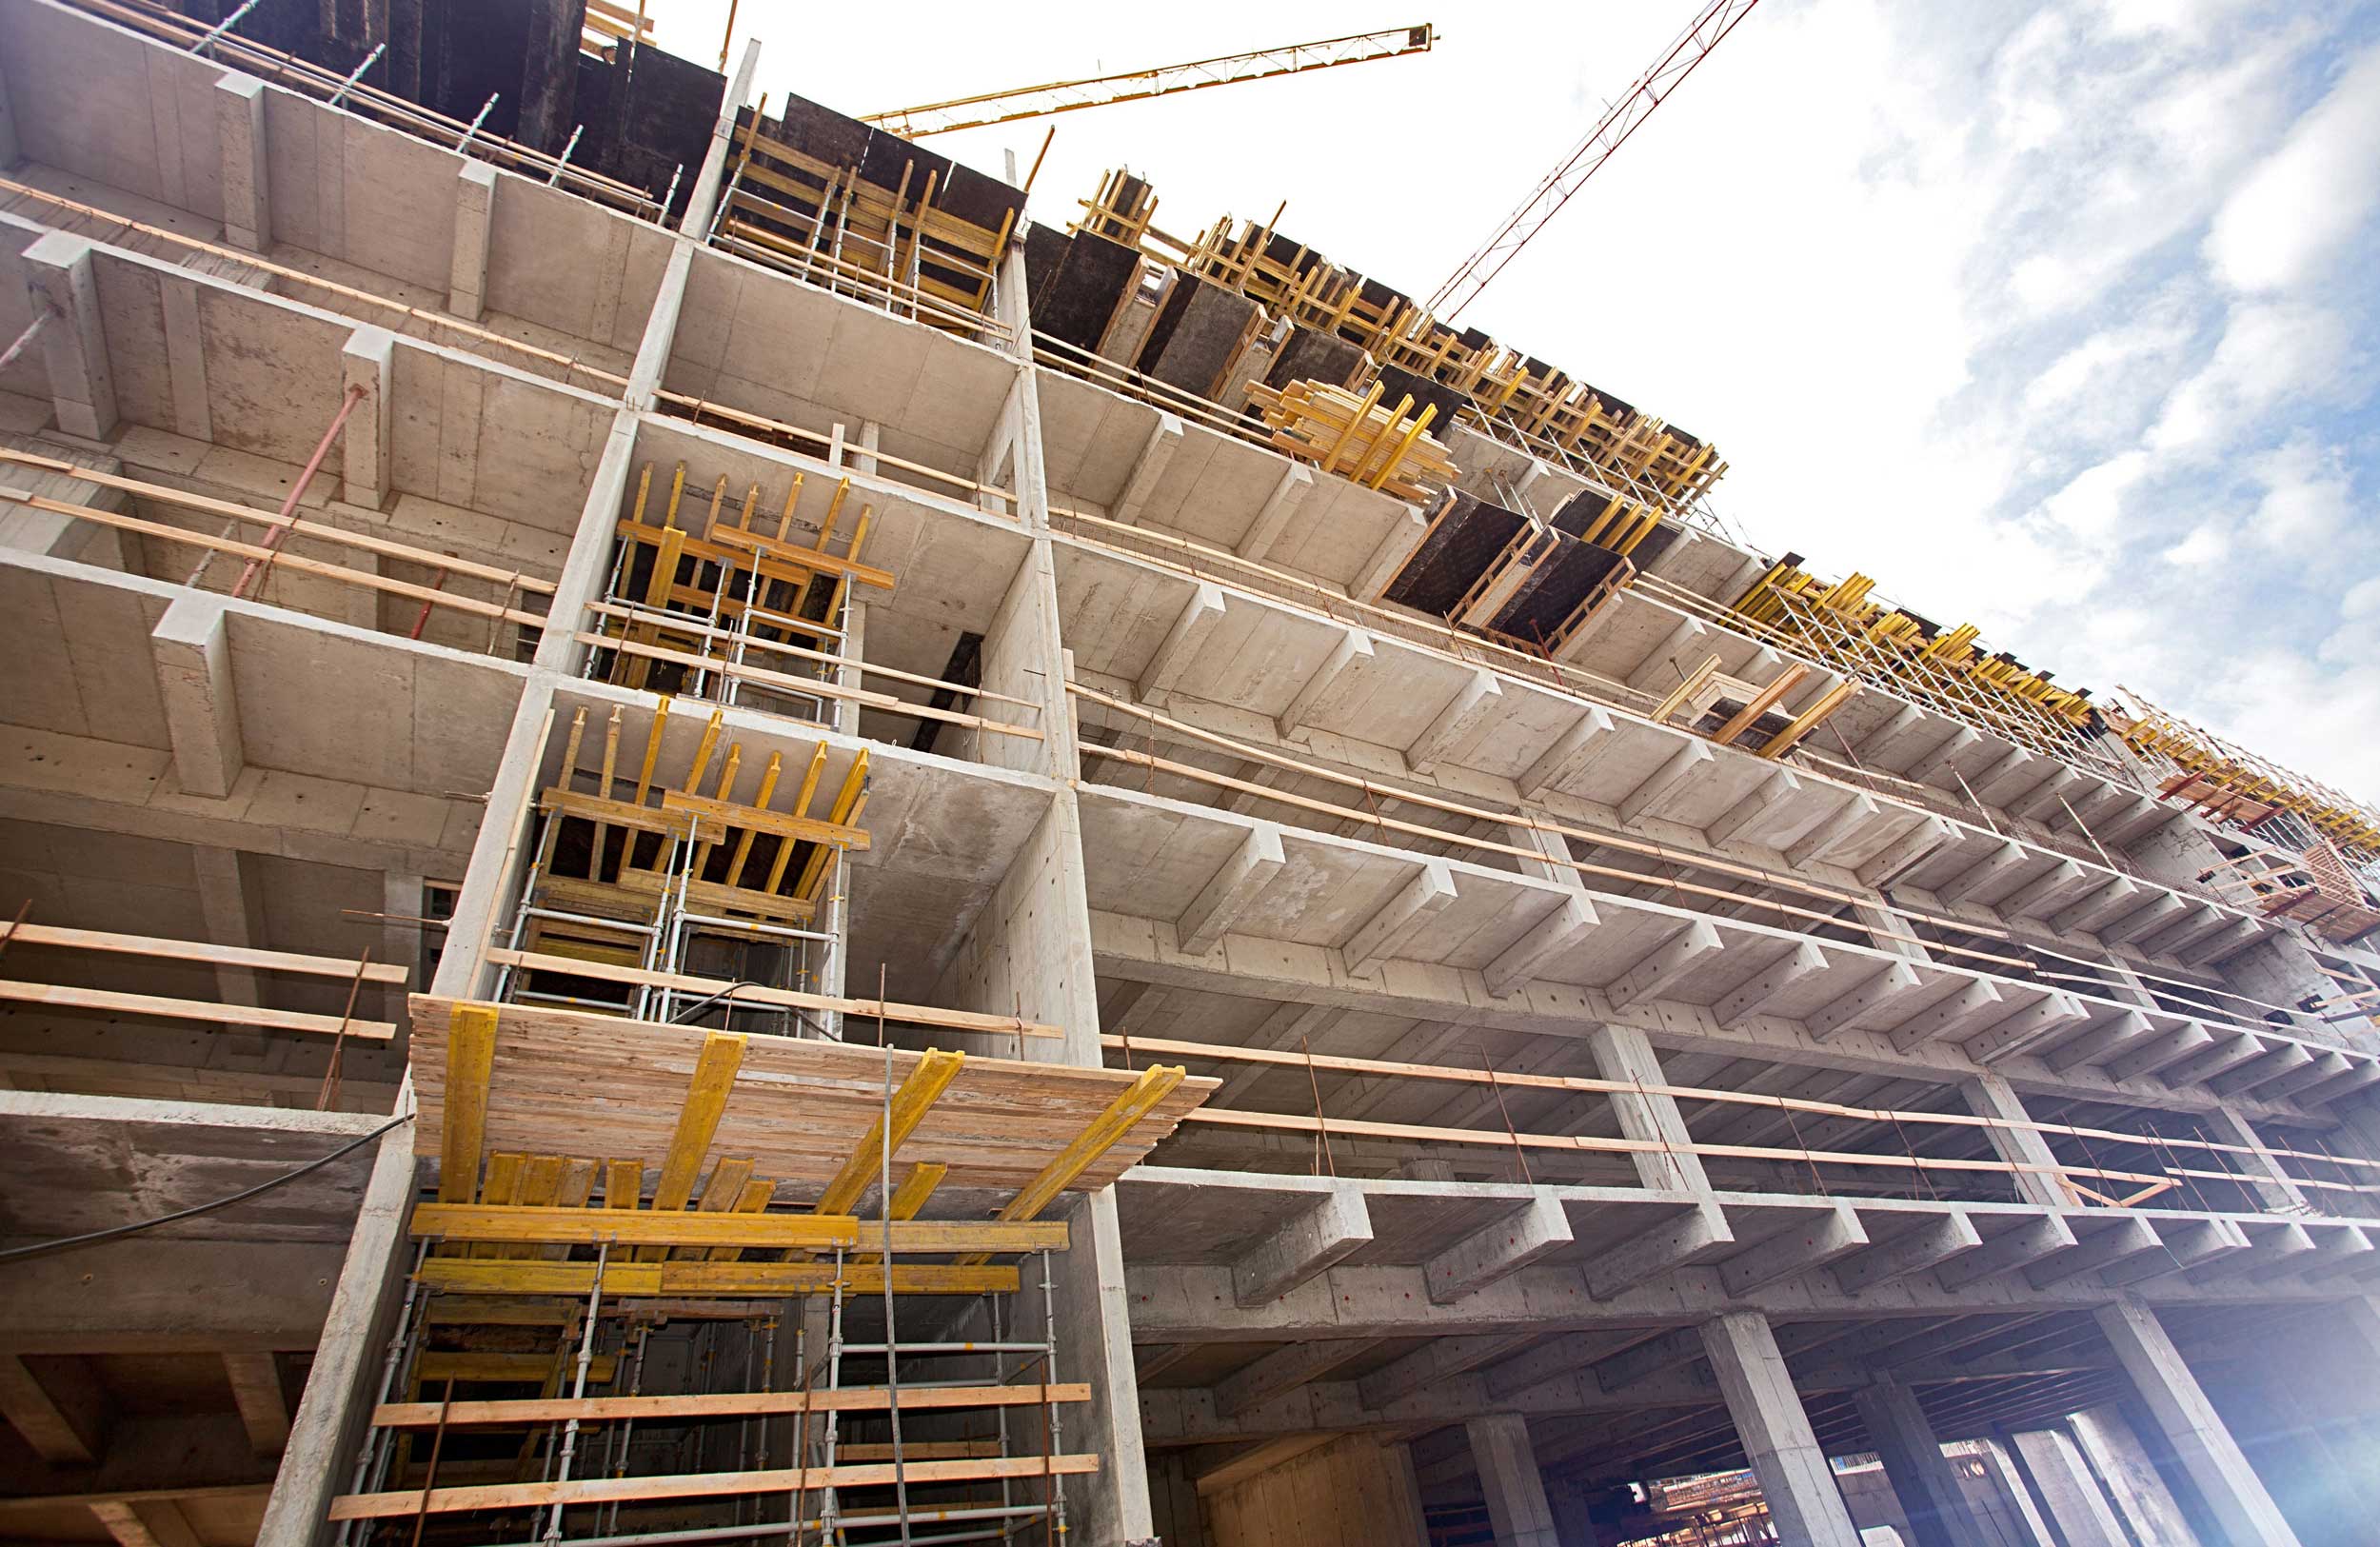 Construction Input Prices Jump Nearly 25%